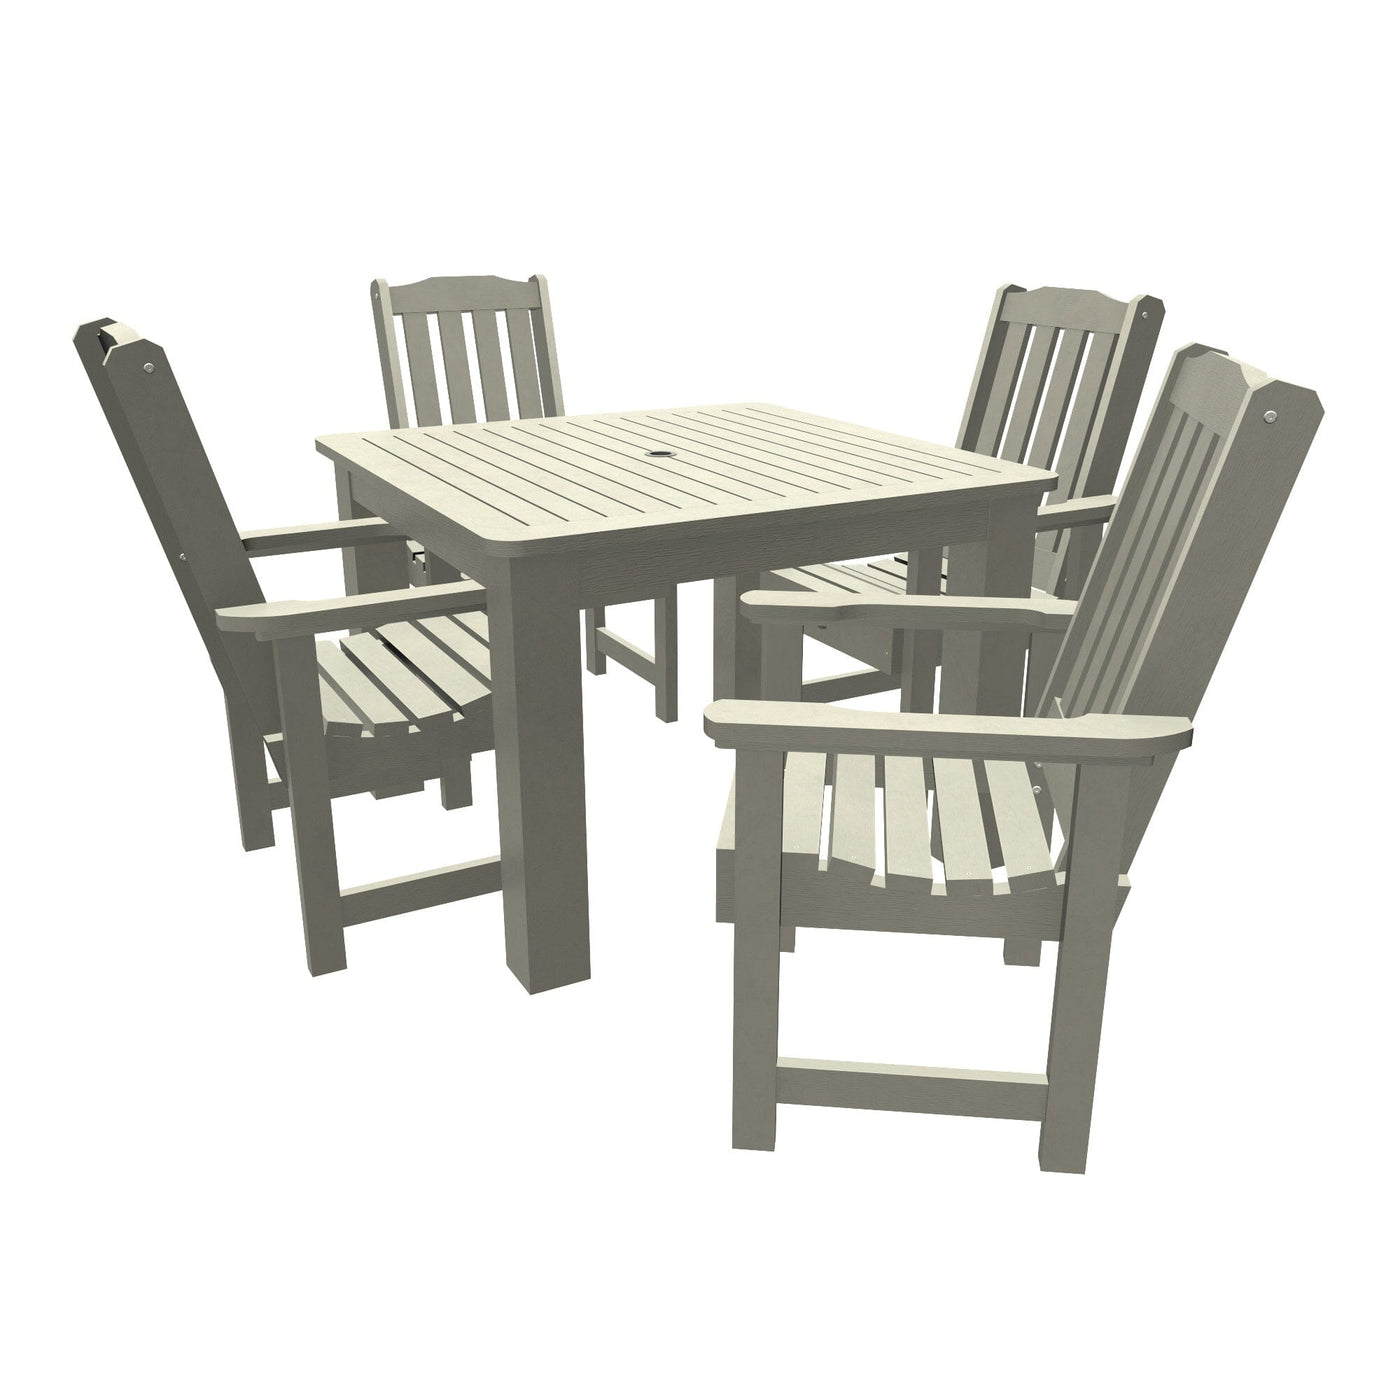 Lehigh 5pc Square Dining Set 42in x 42in - Dining Height Dining Highwood USA Harbor Gray 